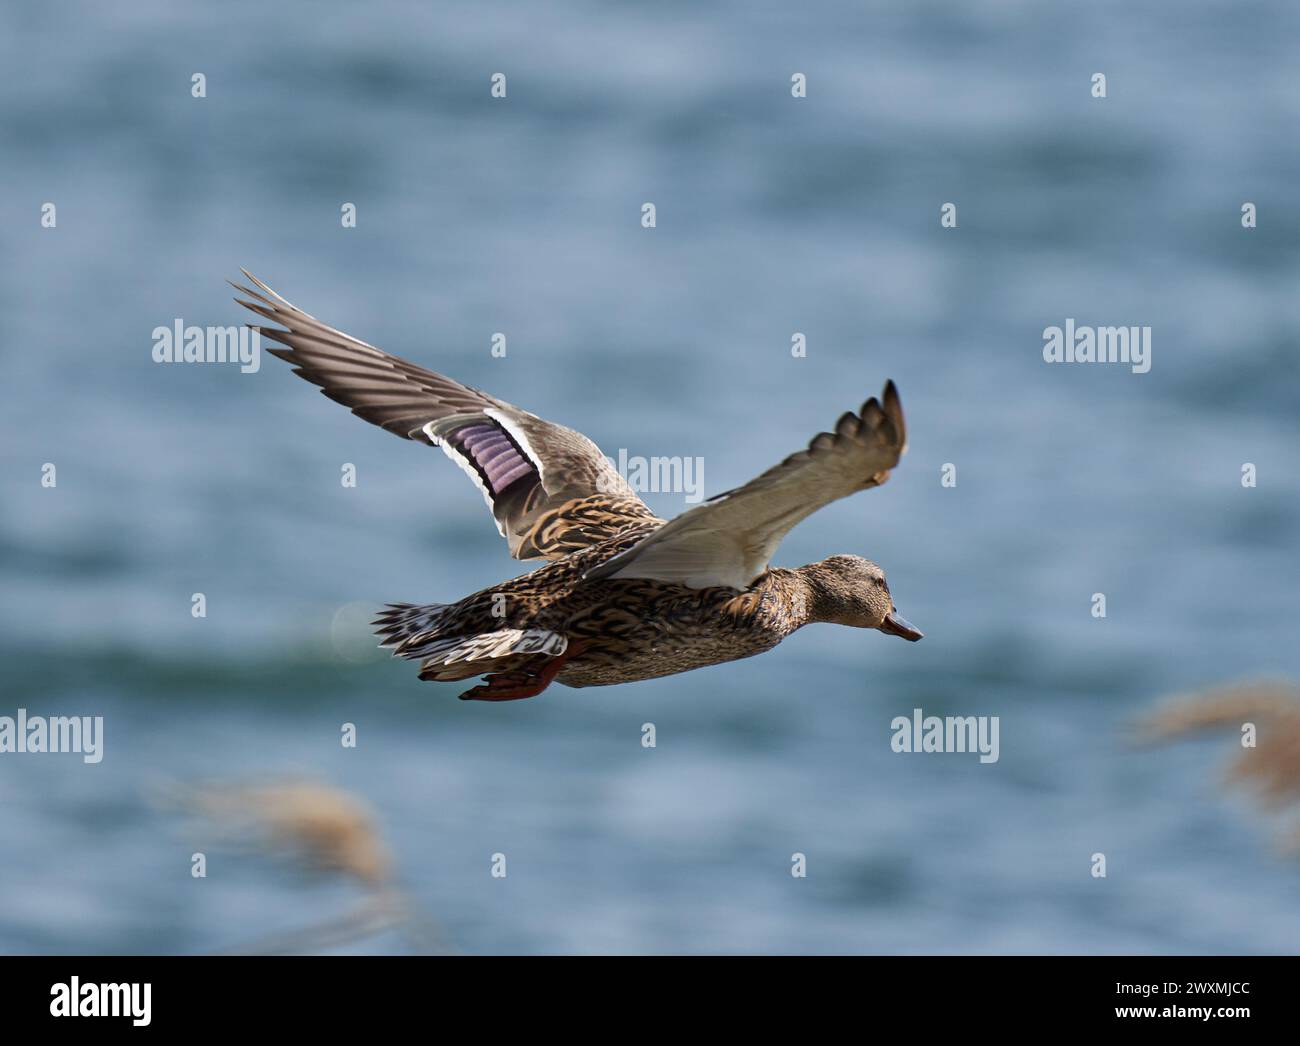 Wild duck in flight against the waves of a lake Stock Photo